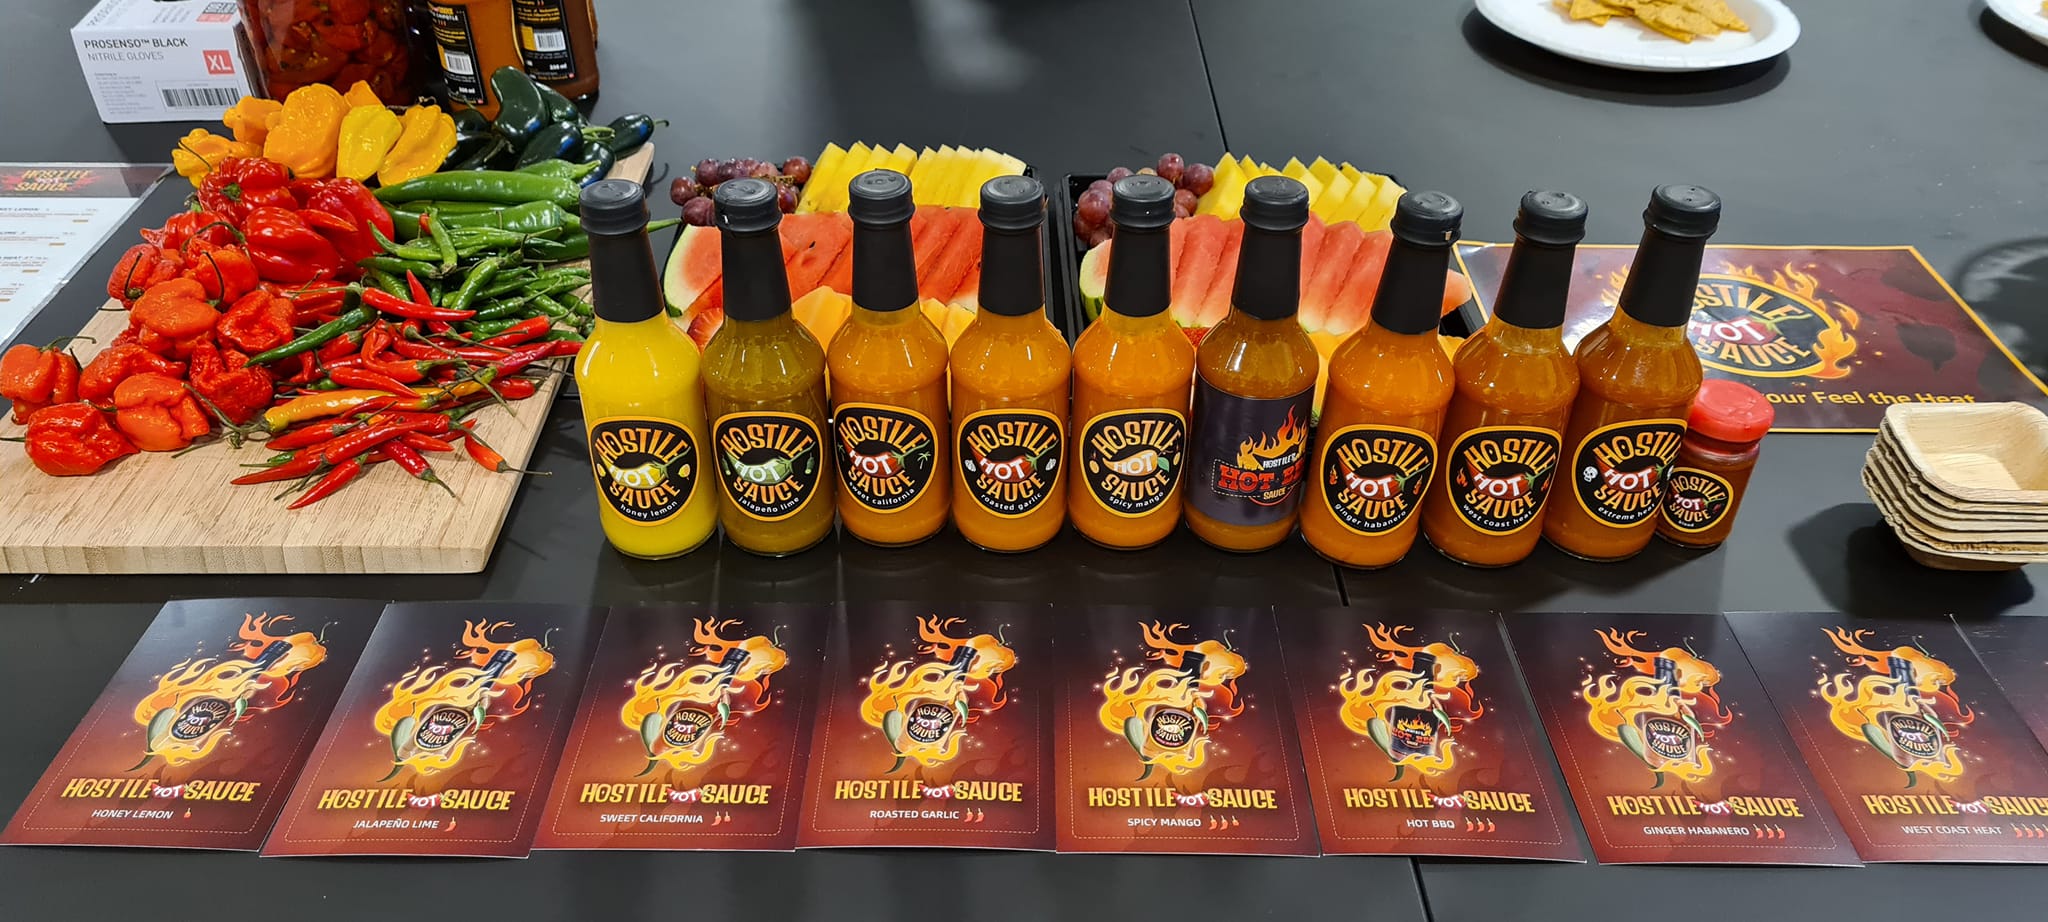 Hot sauce bottles standing side by side with fruit laid out in the background